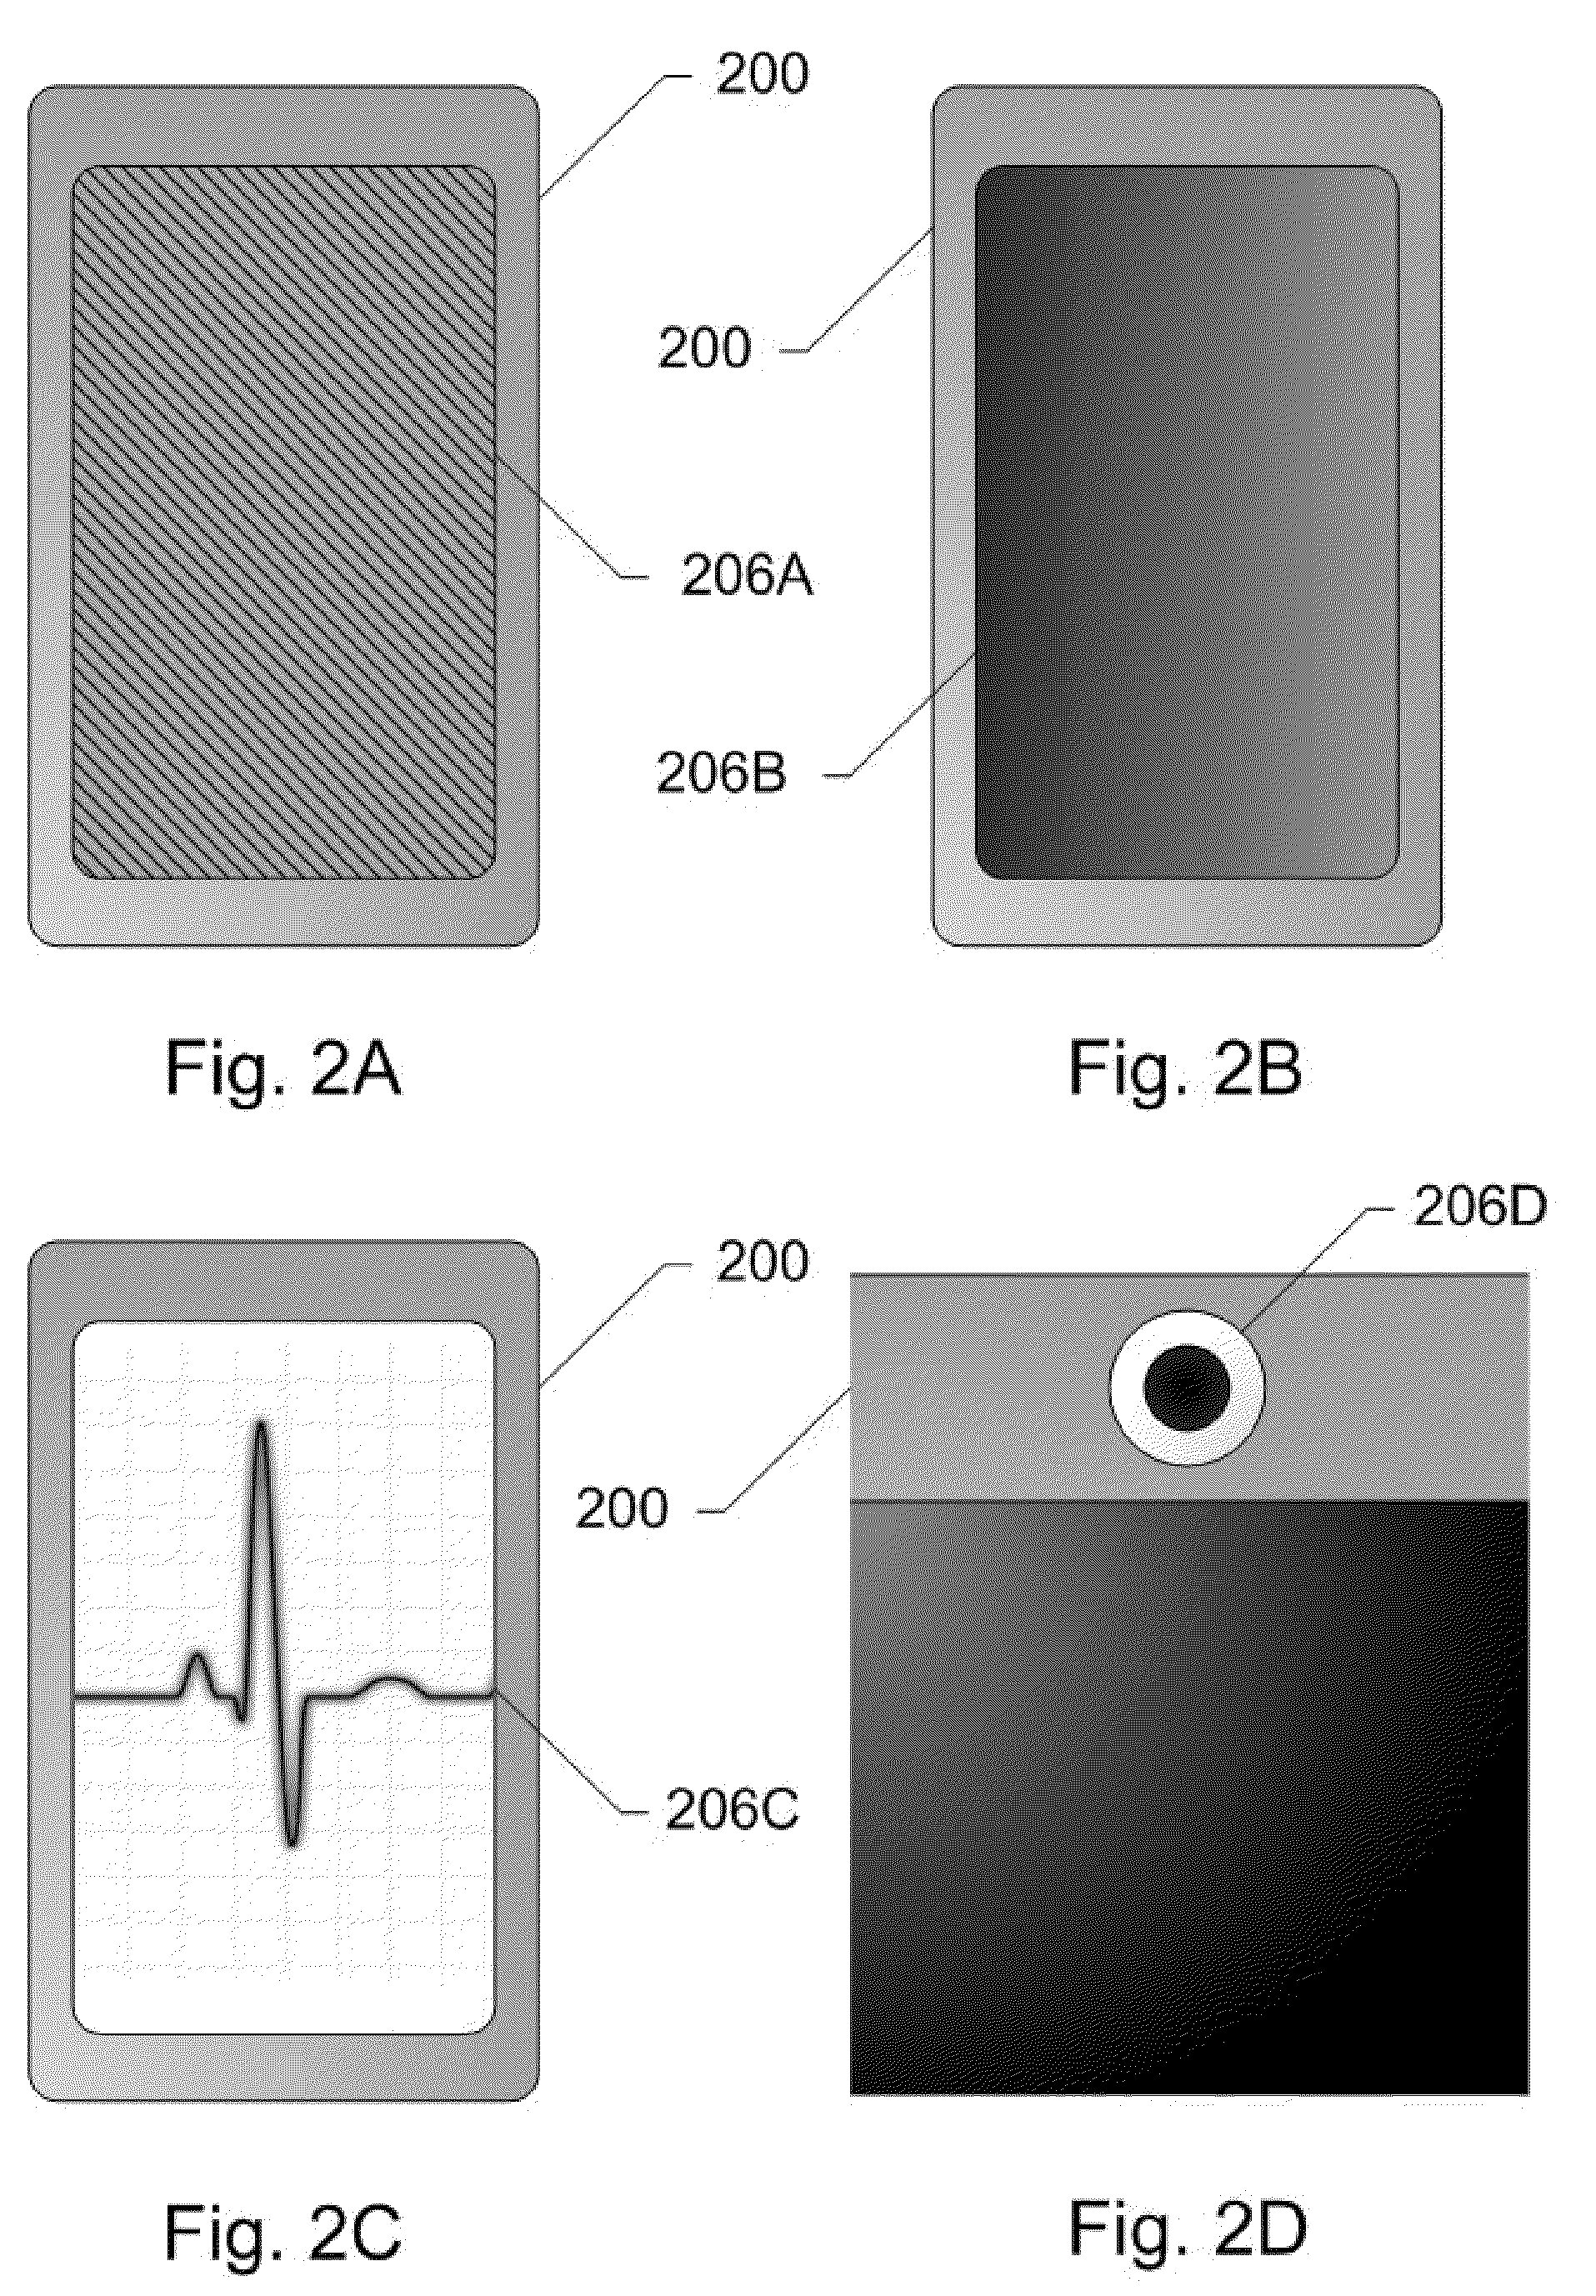 Human Stimulus Activation and Deactivation of a Screensaver